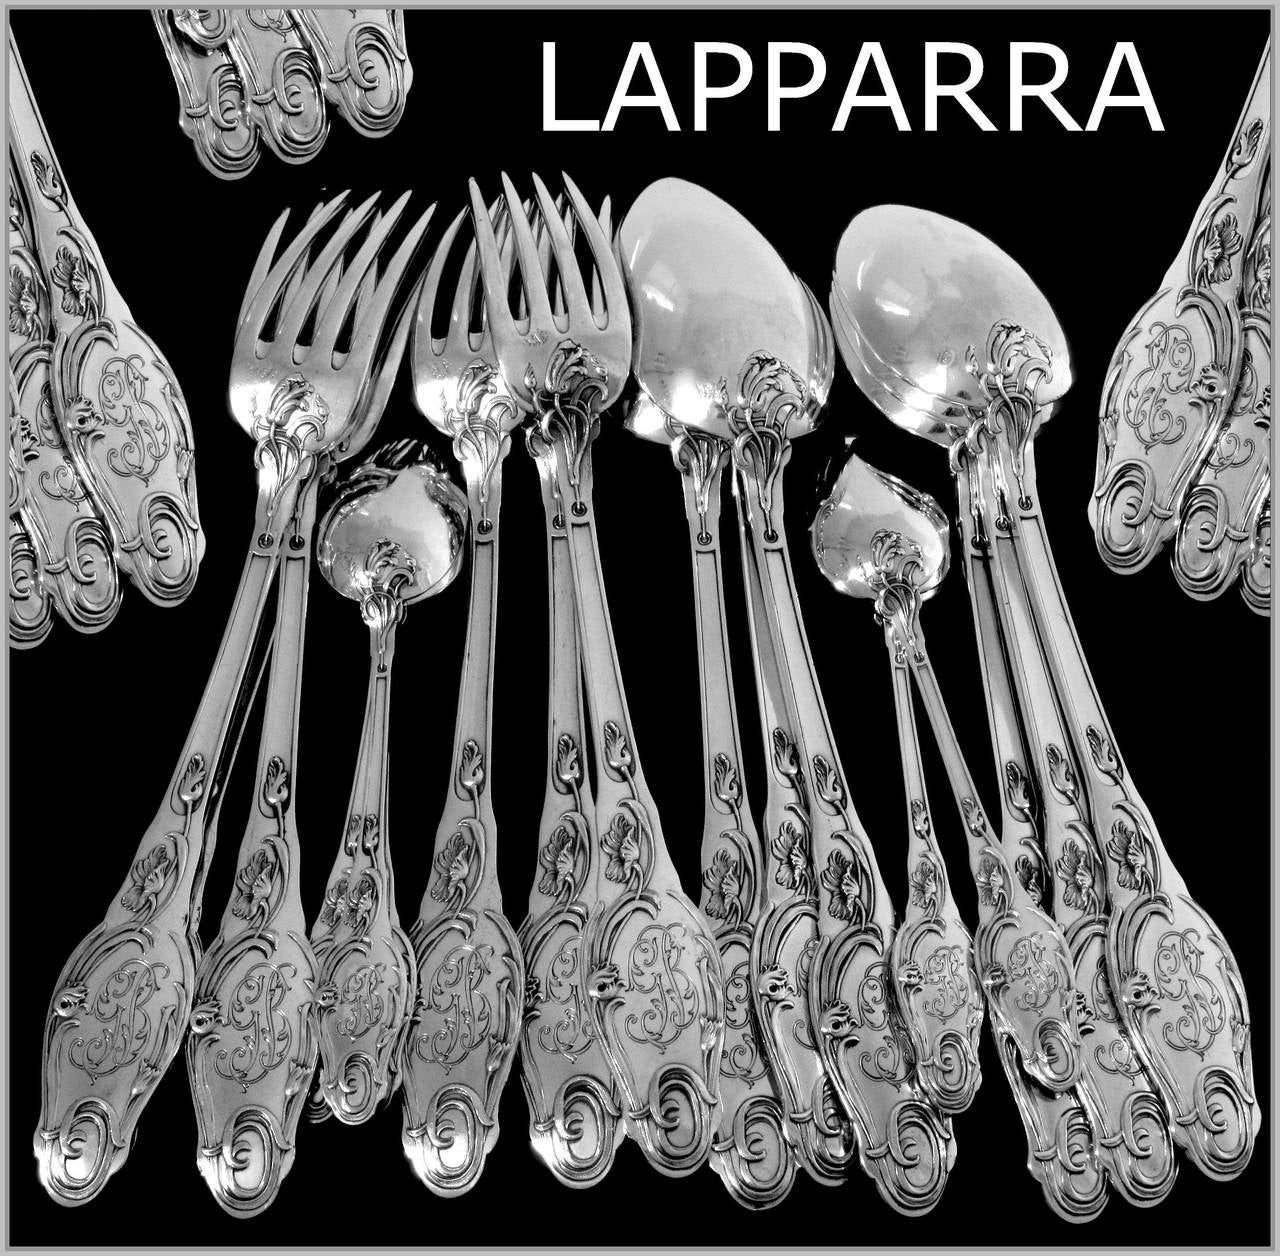 LAPPARRA Fabulous French Sterling Silver Dinner Flatware Set 18 pc Poppies

Head of Minerve 1 st titre for 950/1000 French Sterling Silver guarantee

The design and workmanship of this set is exceptional. The handles have sophisticated and